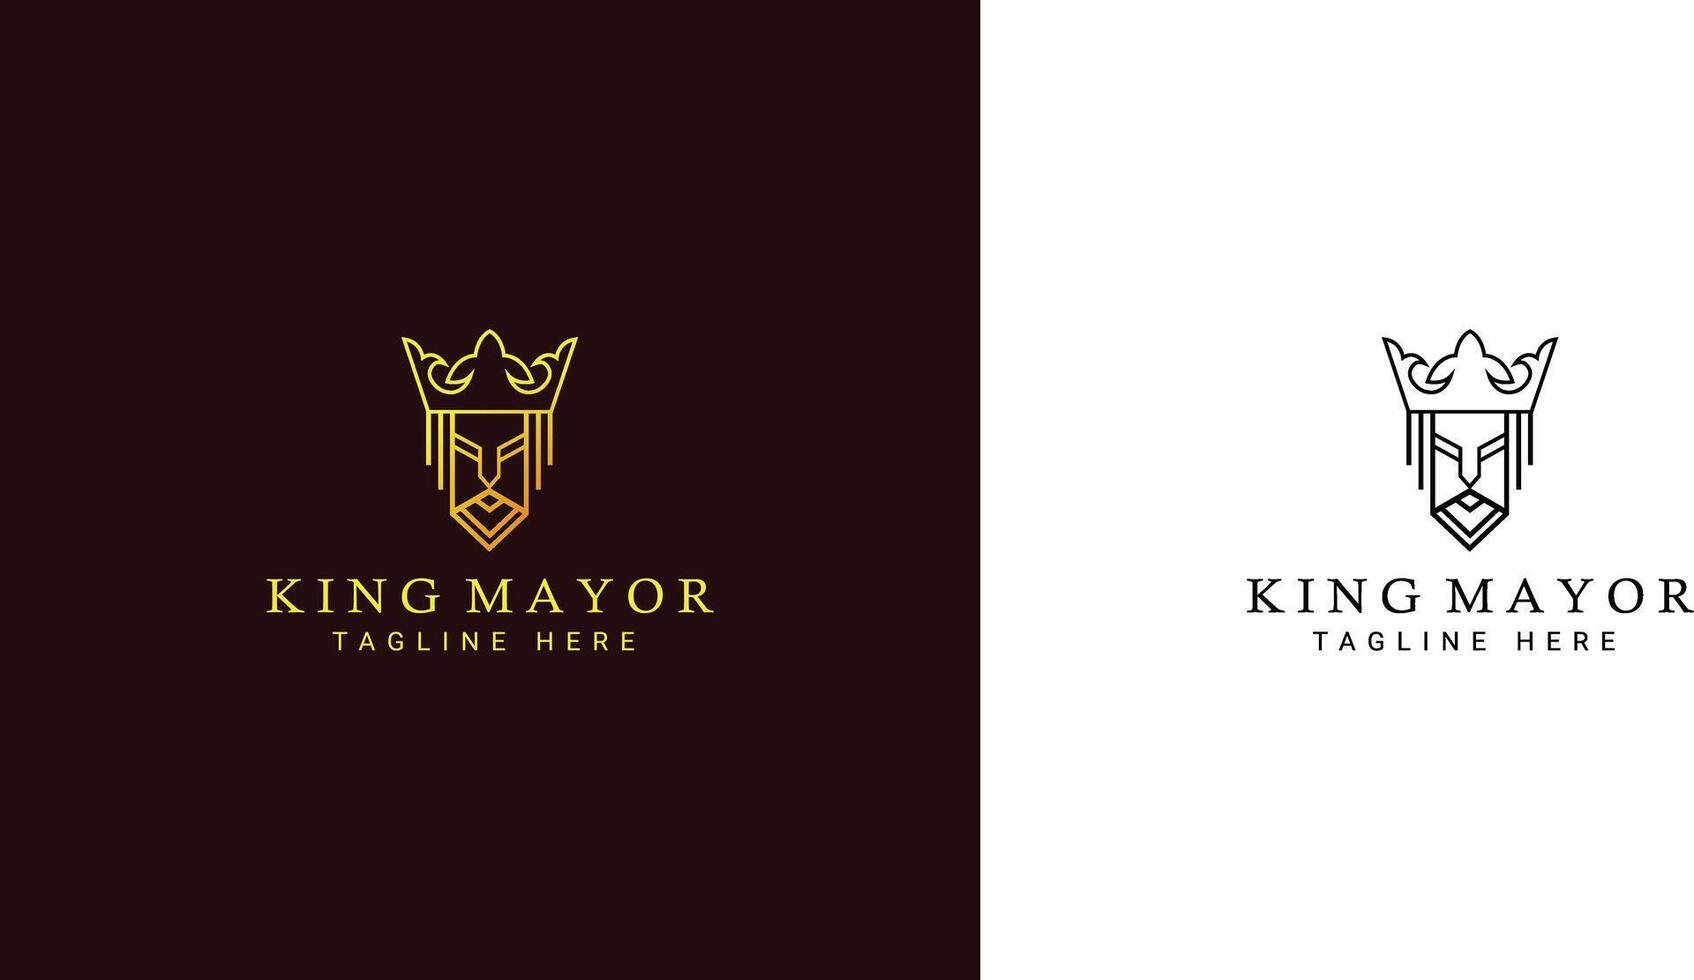 Minimalistic Old Greek King Crown and Mustache Face Logo Design in Elegant Vector Line Art Style